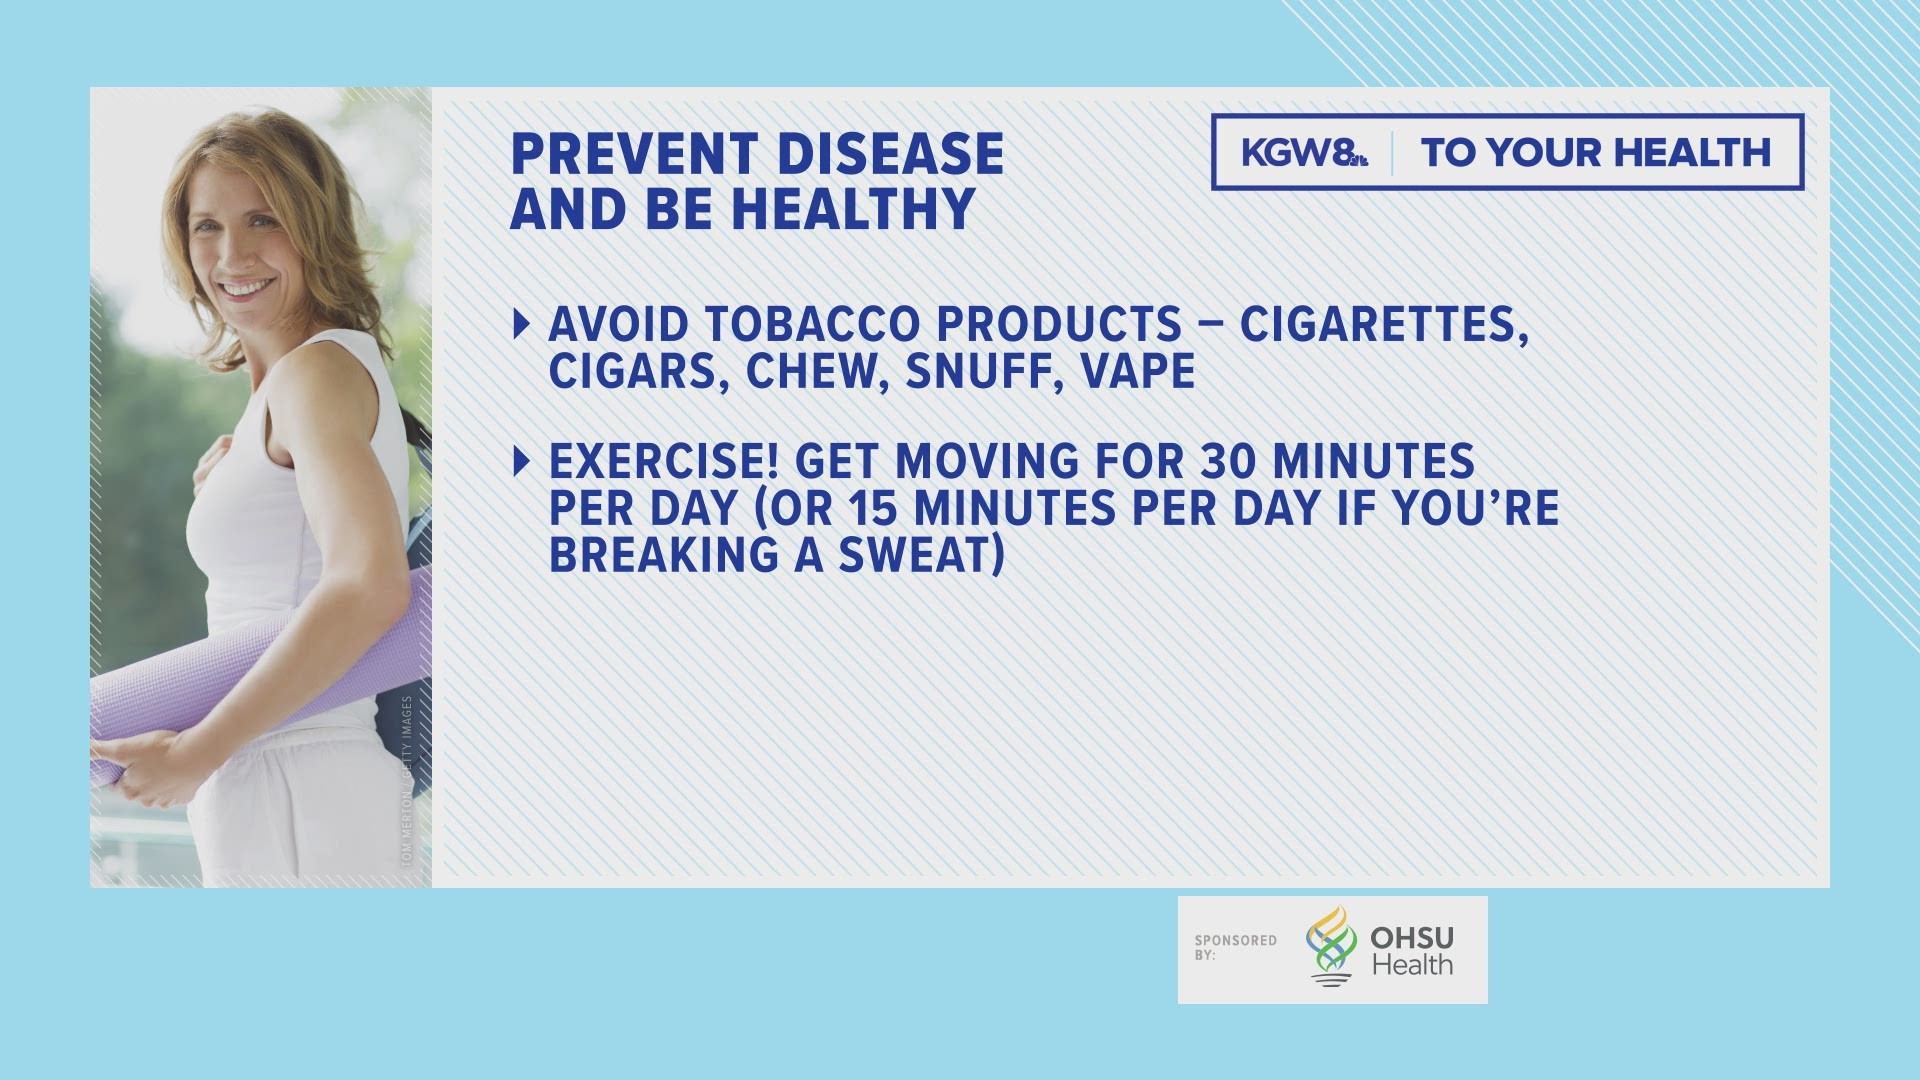 From OHSU Health, here are four ways to prevent disease and be healthy.